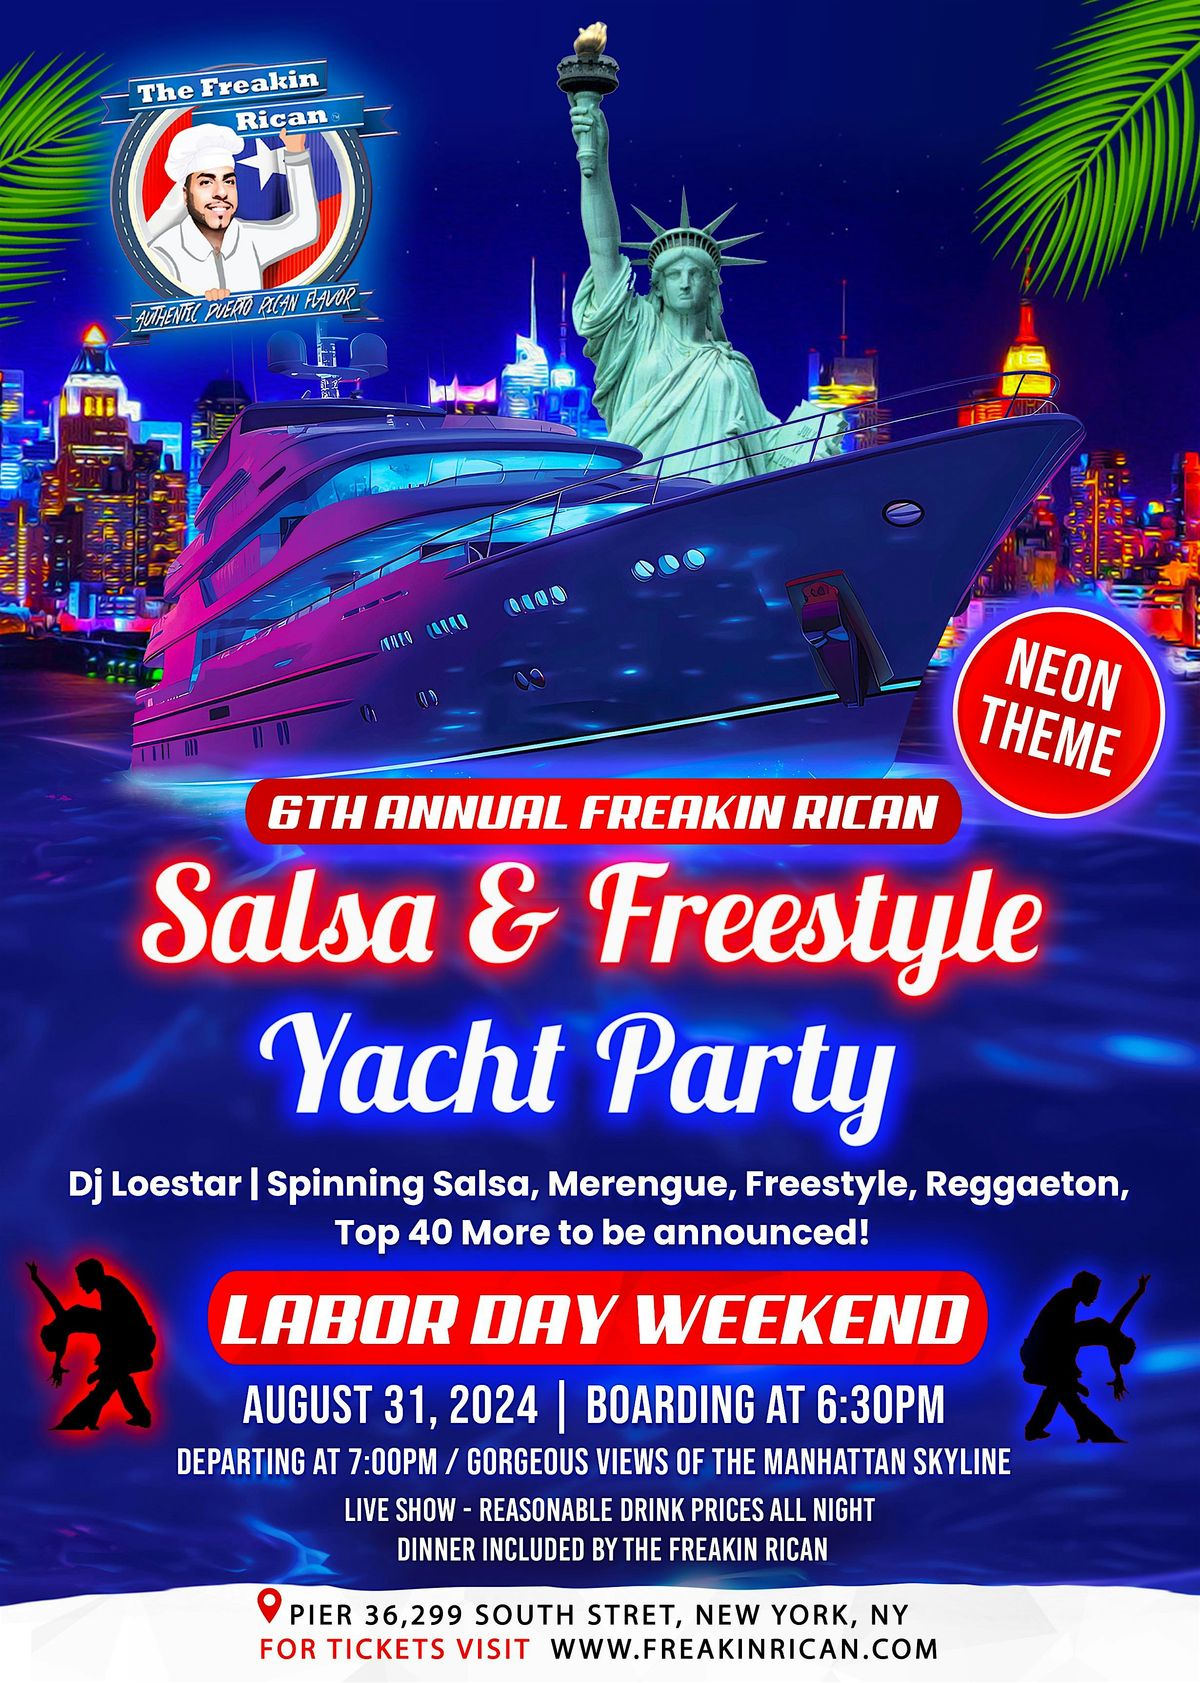 6TH ANNUAL FREAKIN RICAN SALSA & FREESTYLE YACHT  PARTY